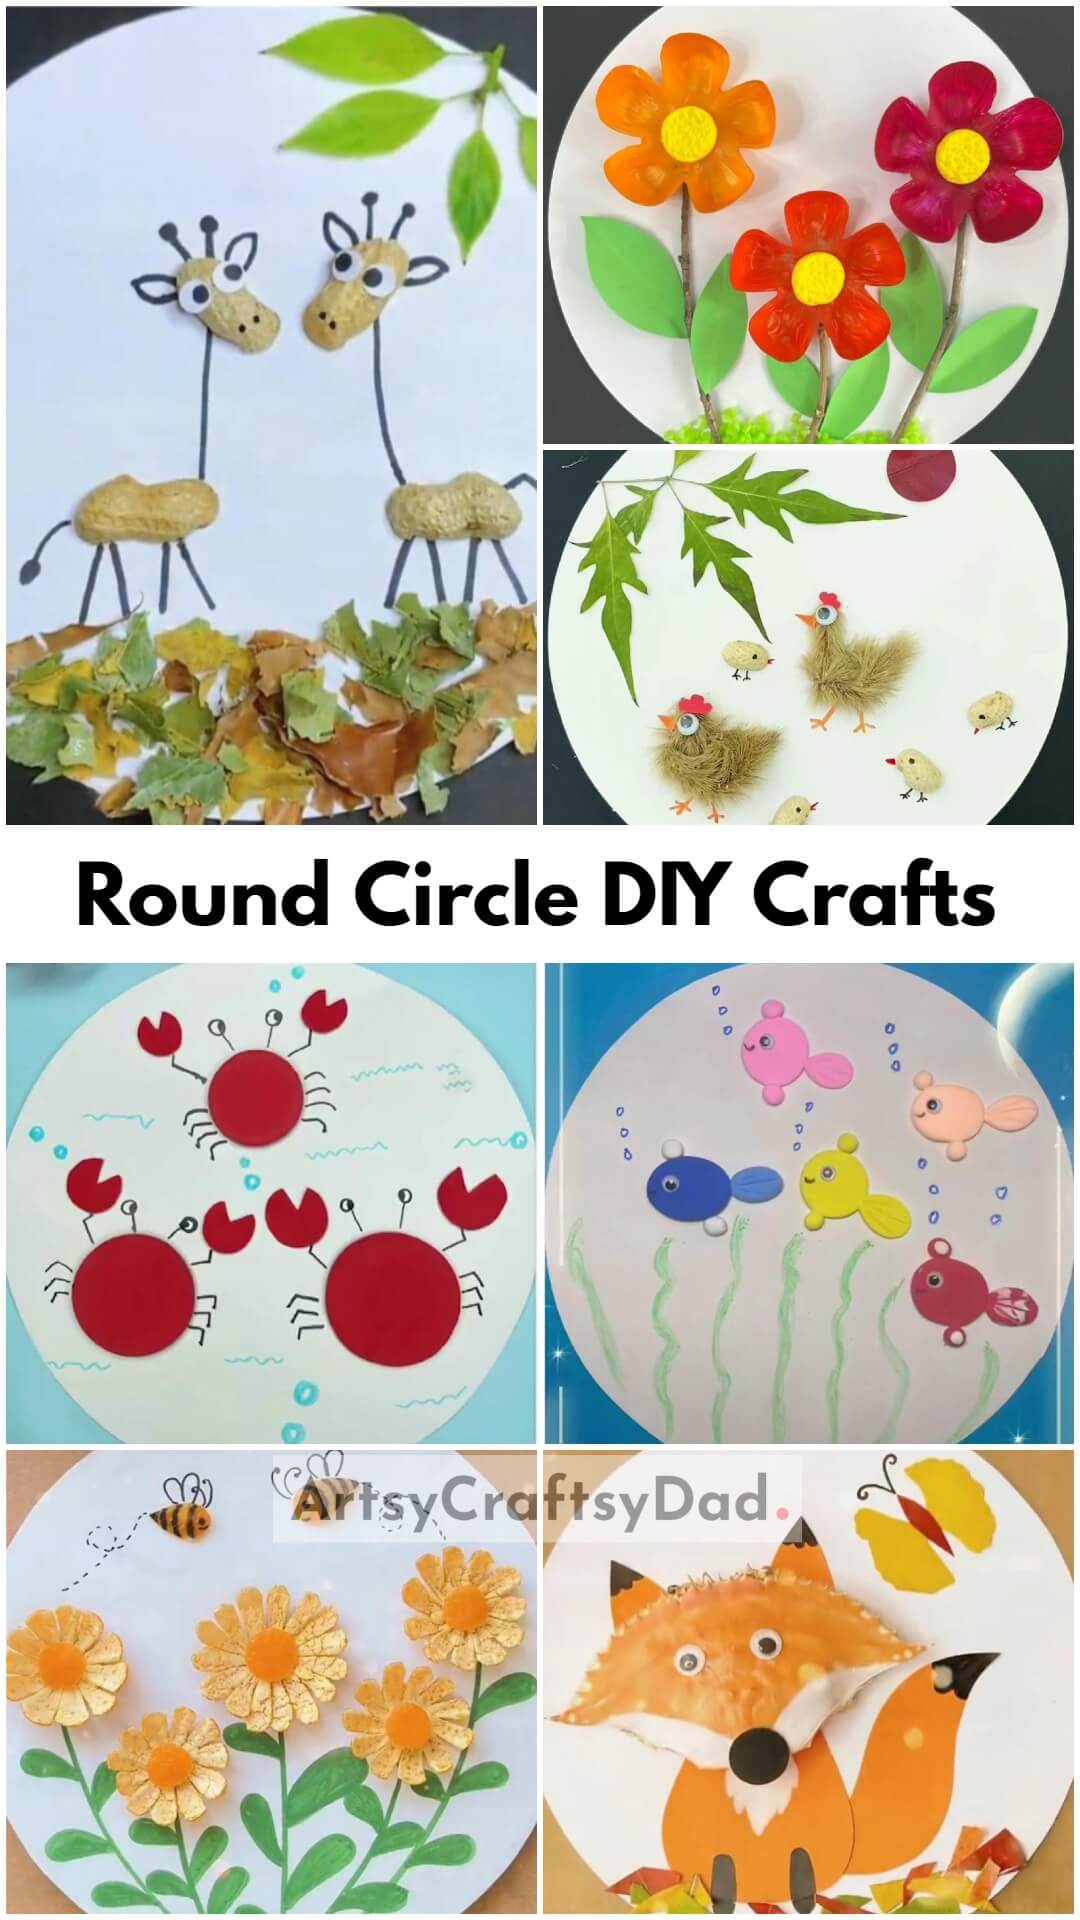 DIY Crafts Using Recycled Materials on Round Circle